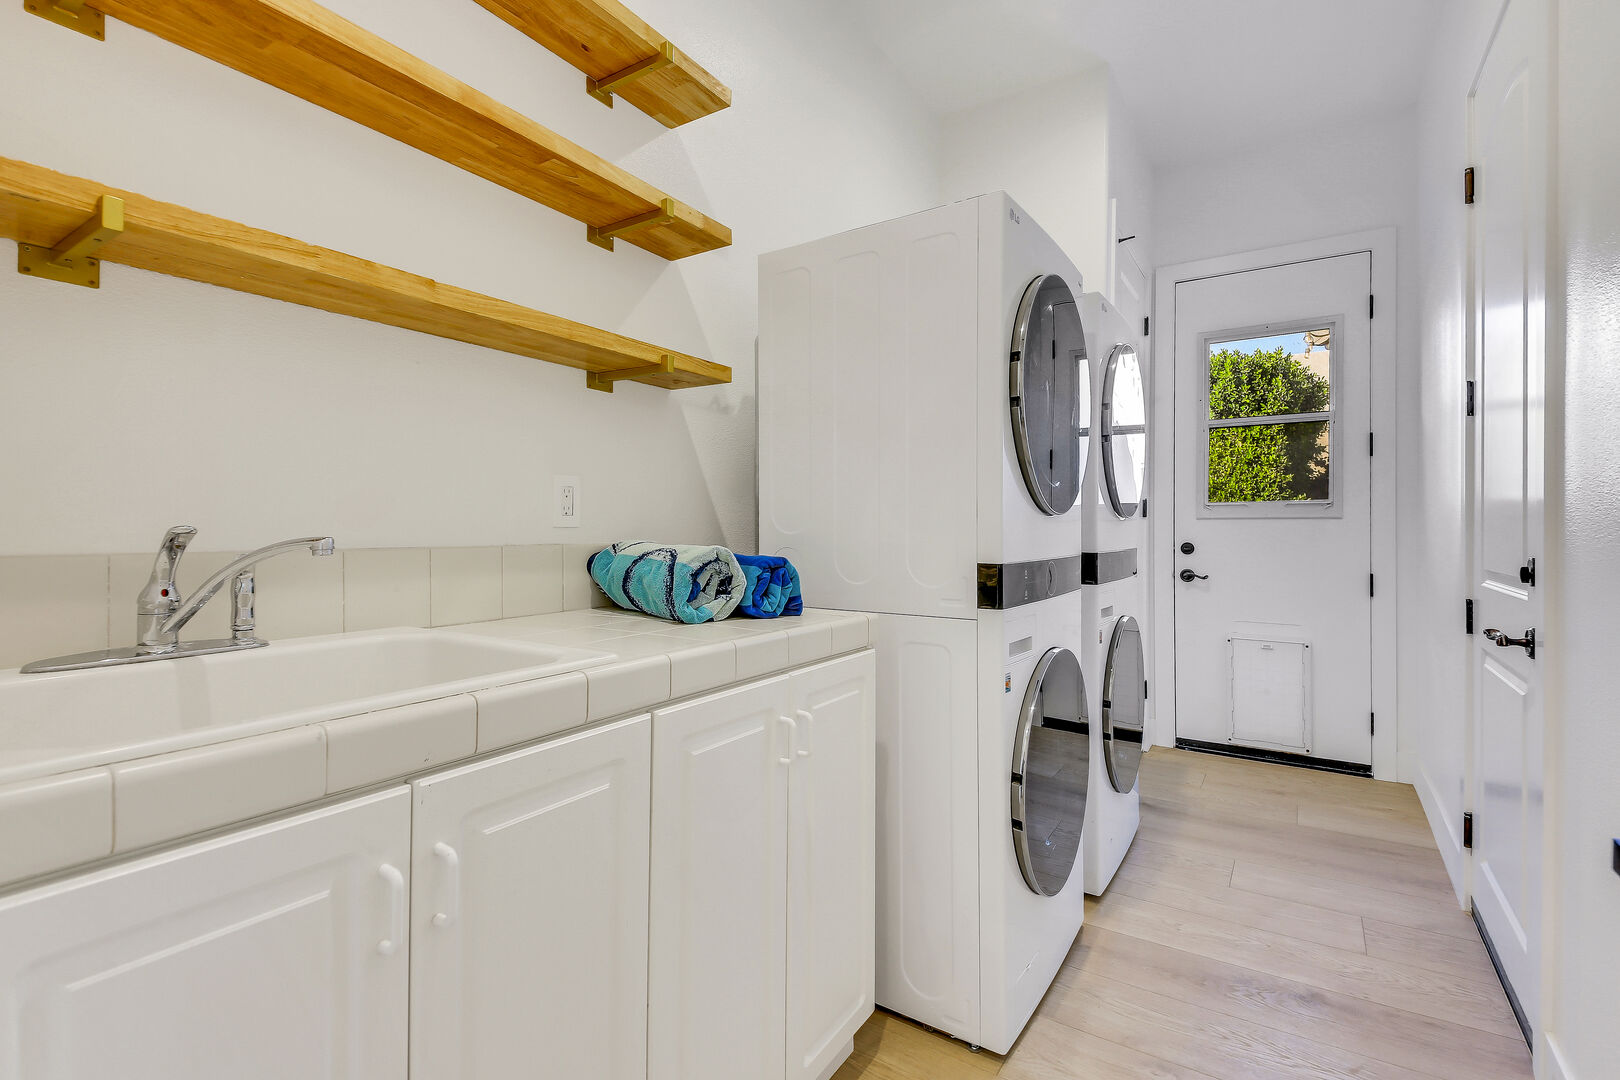 In the fully equipped laundry room, you'll find a washer, dryer, iron, ironing board, and laundry pods for convenience.